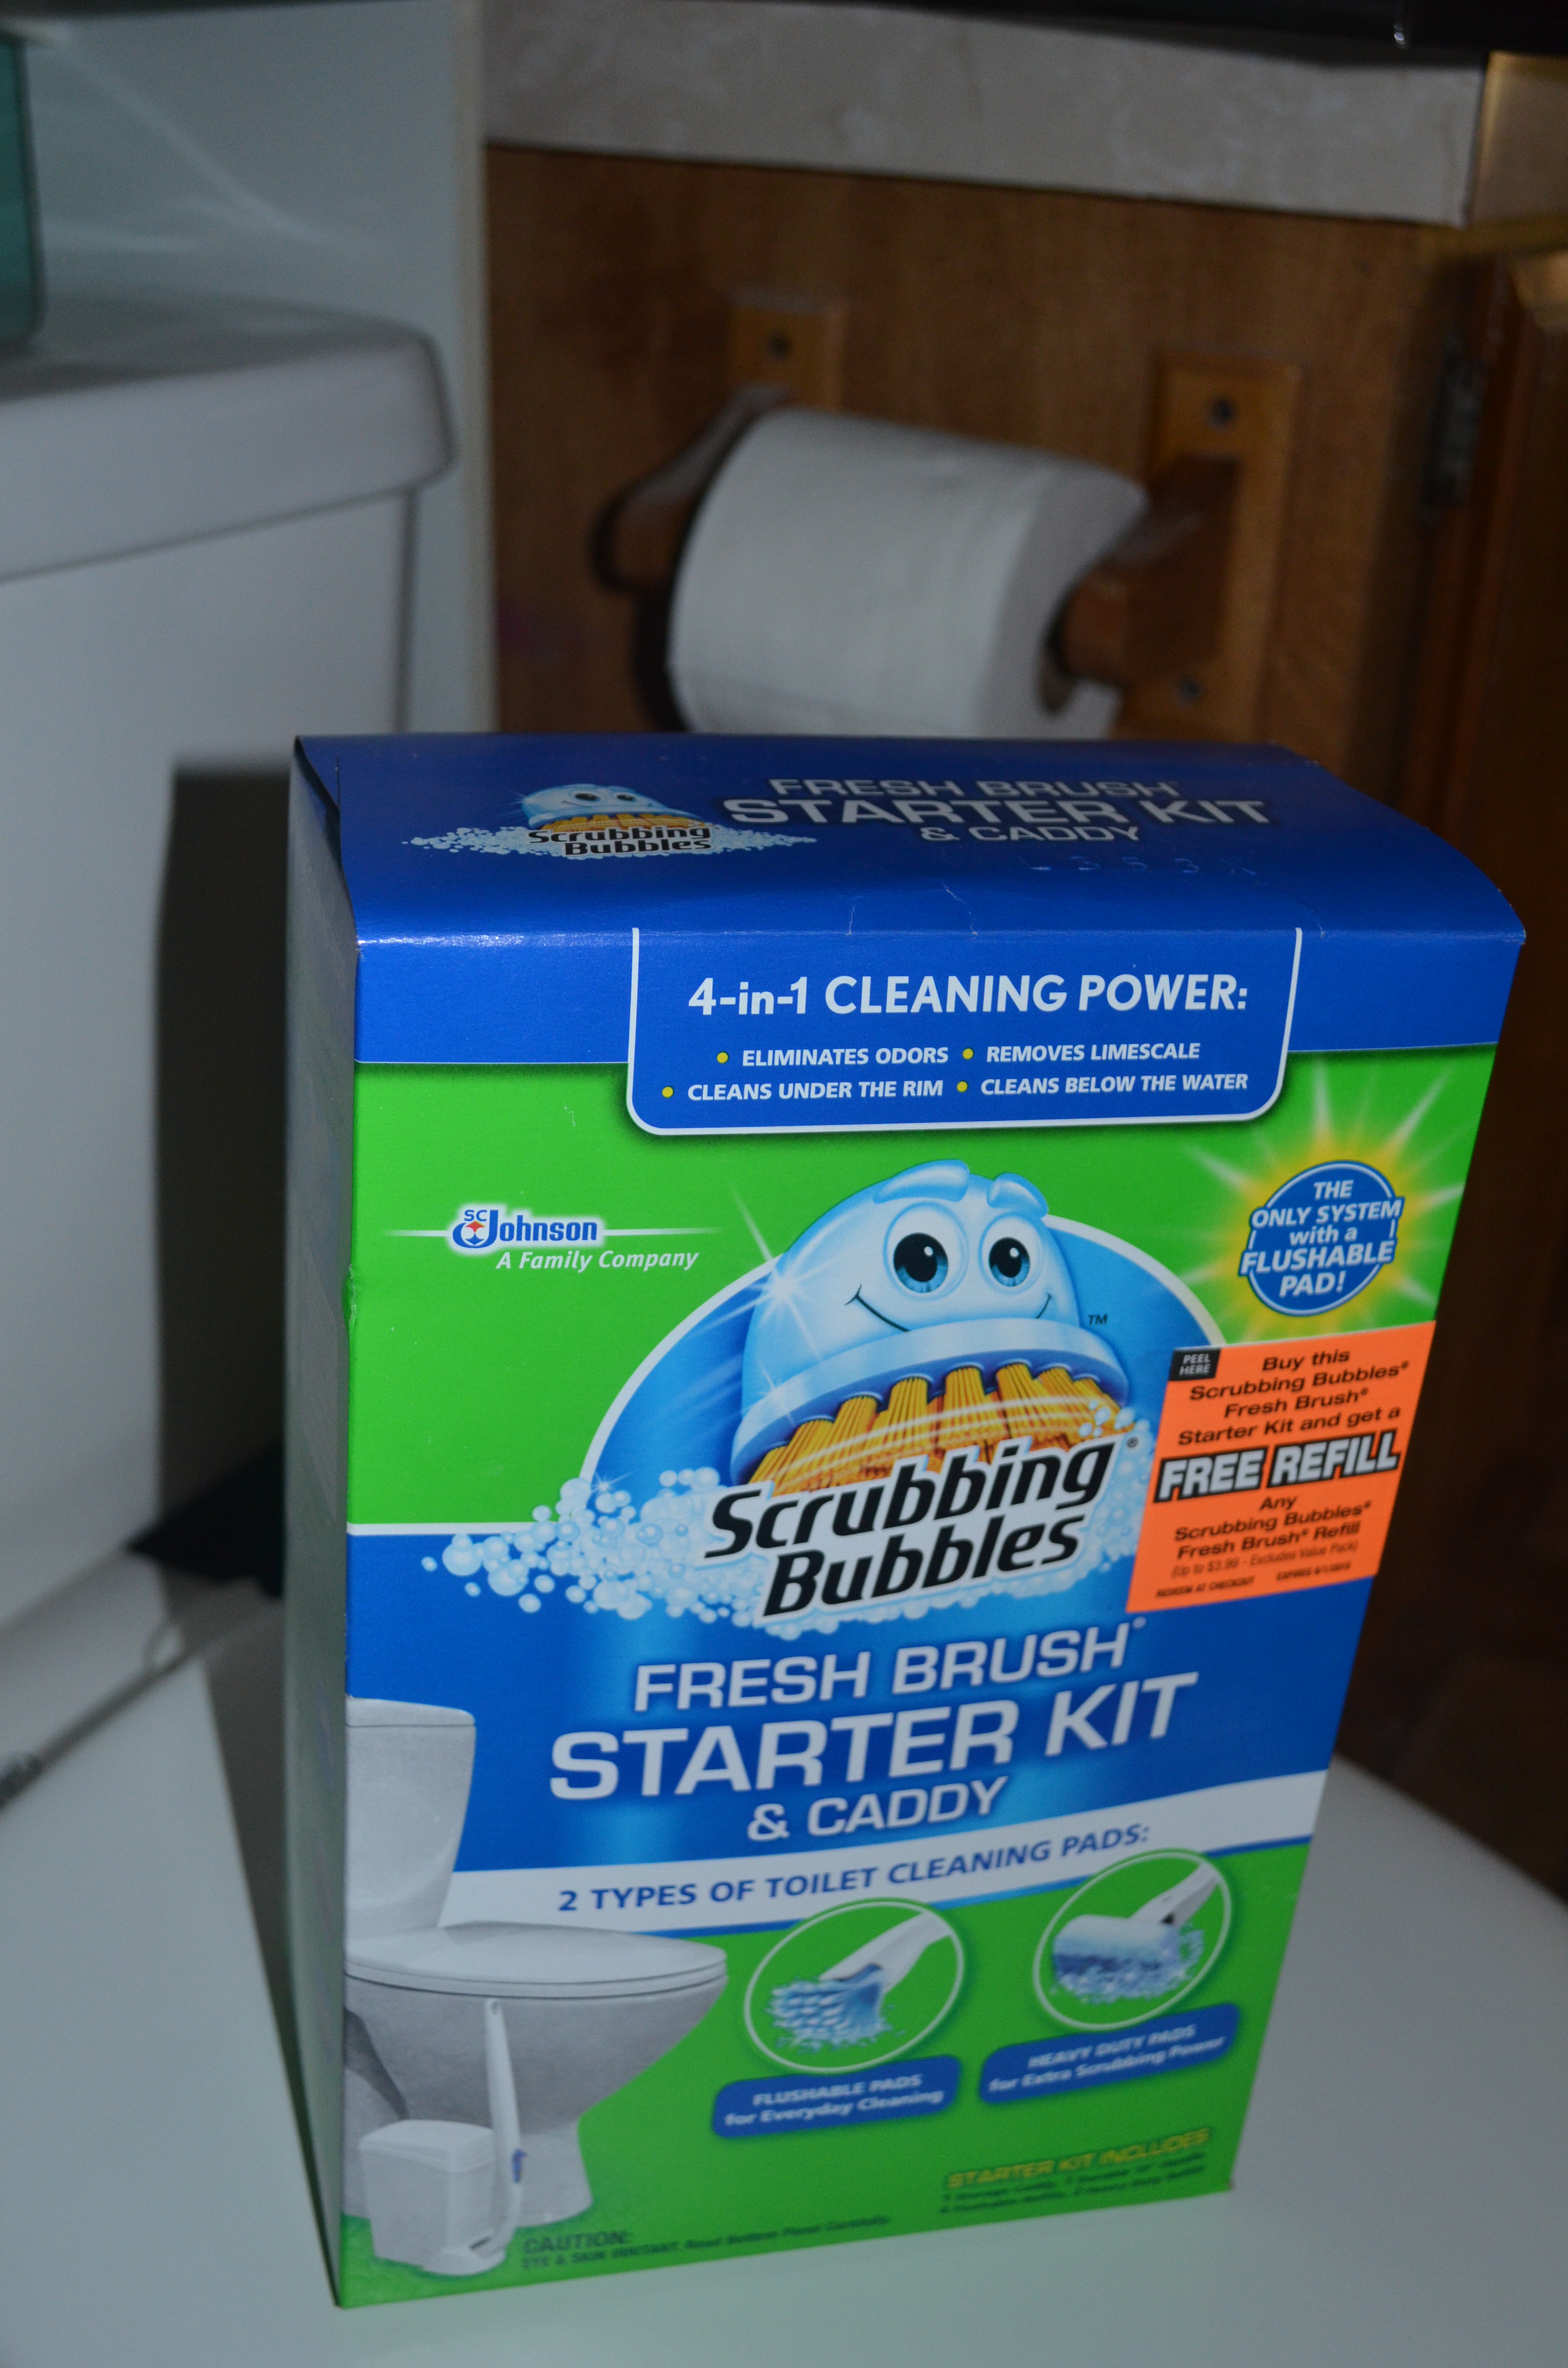 Scrubbing Bubbles Fresh Brush Toilet Cleaner Reviews And Opinions